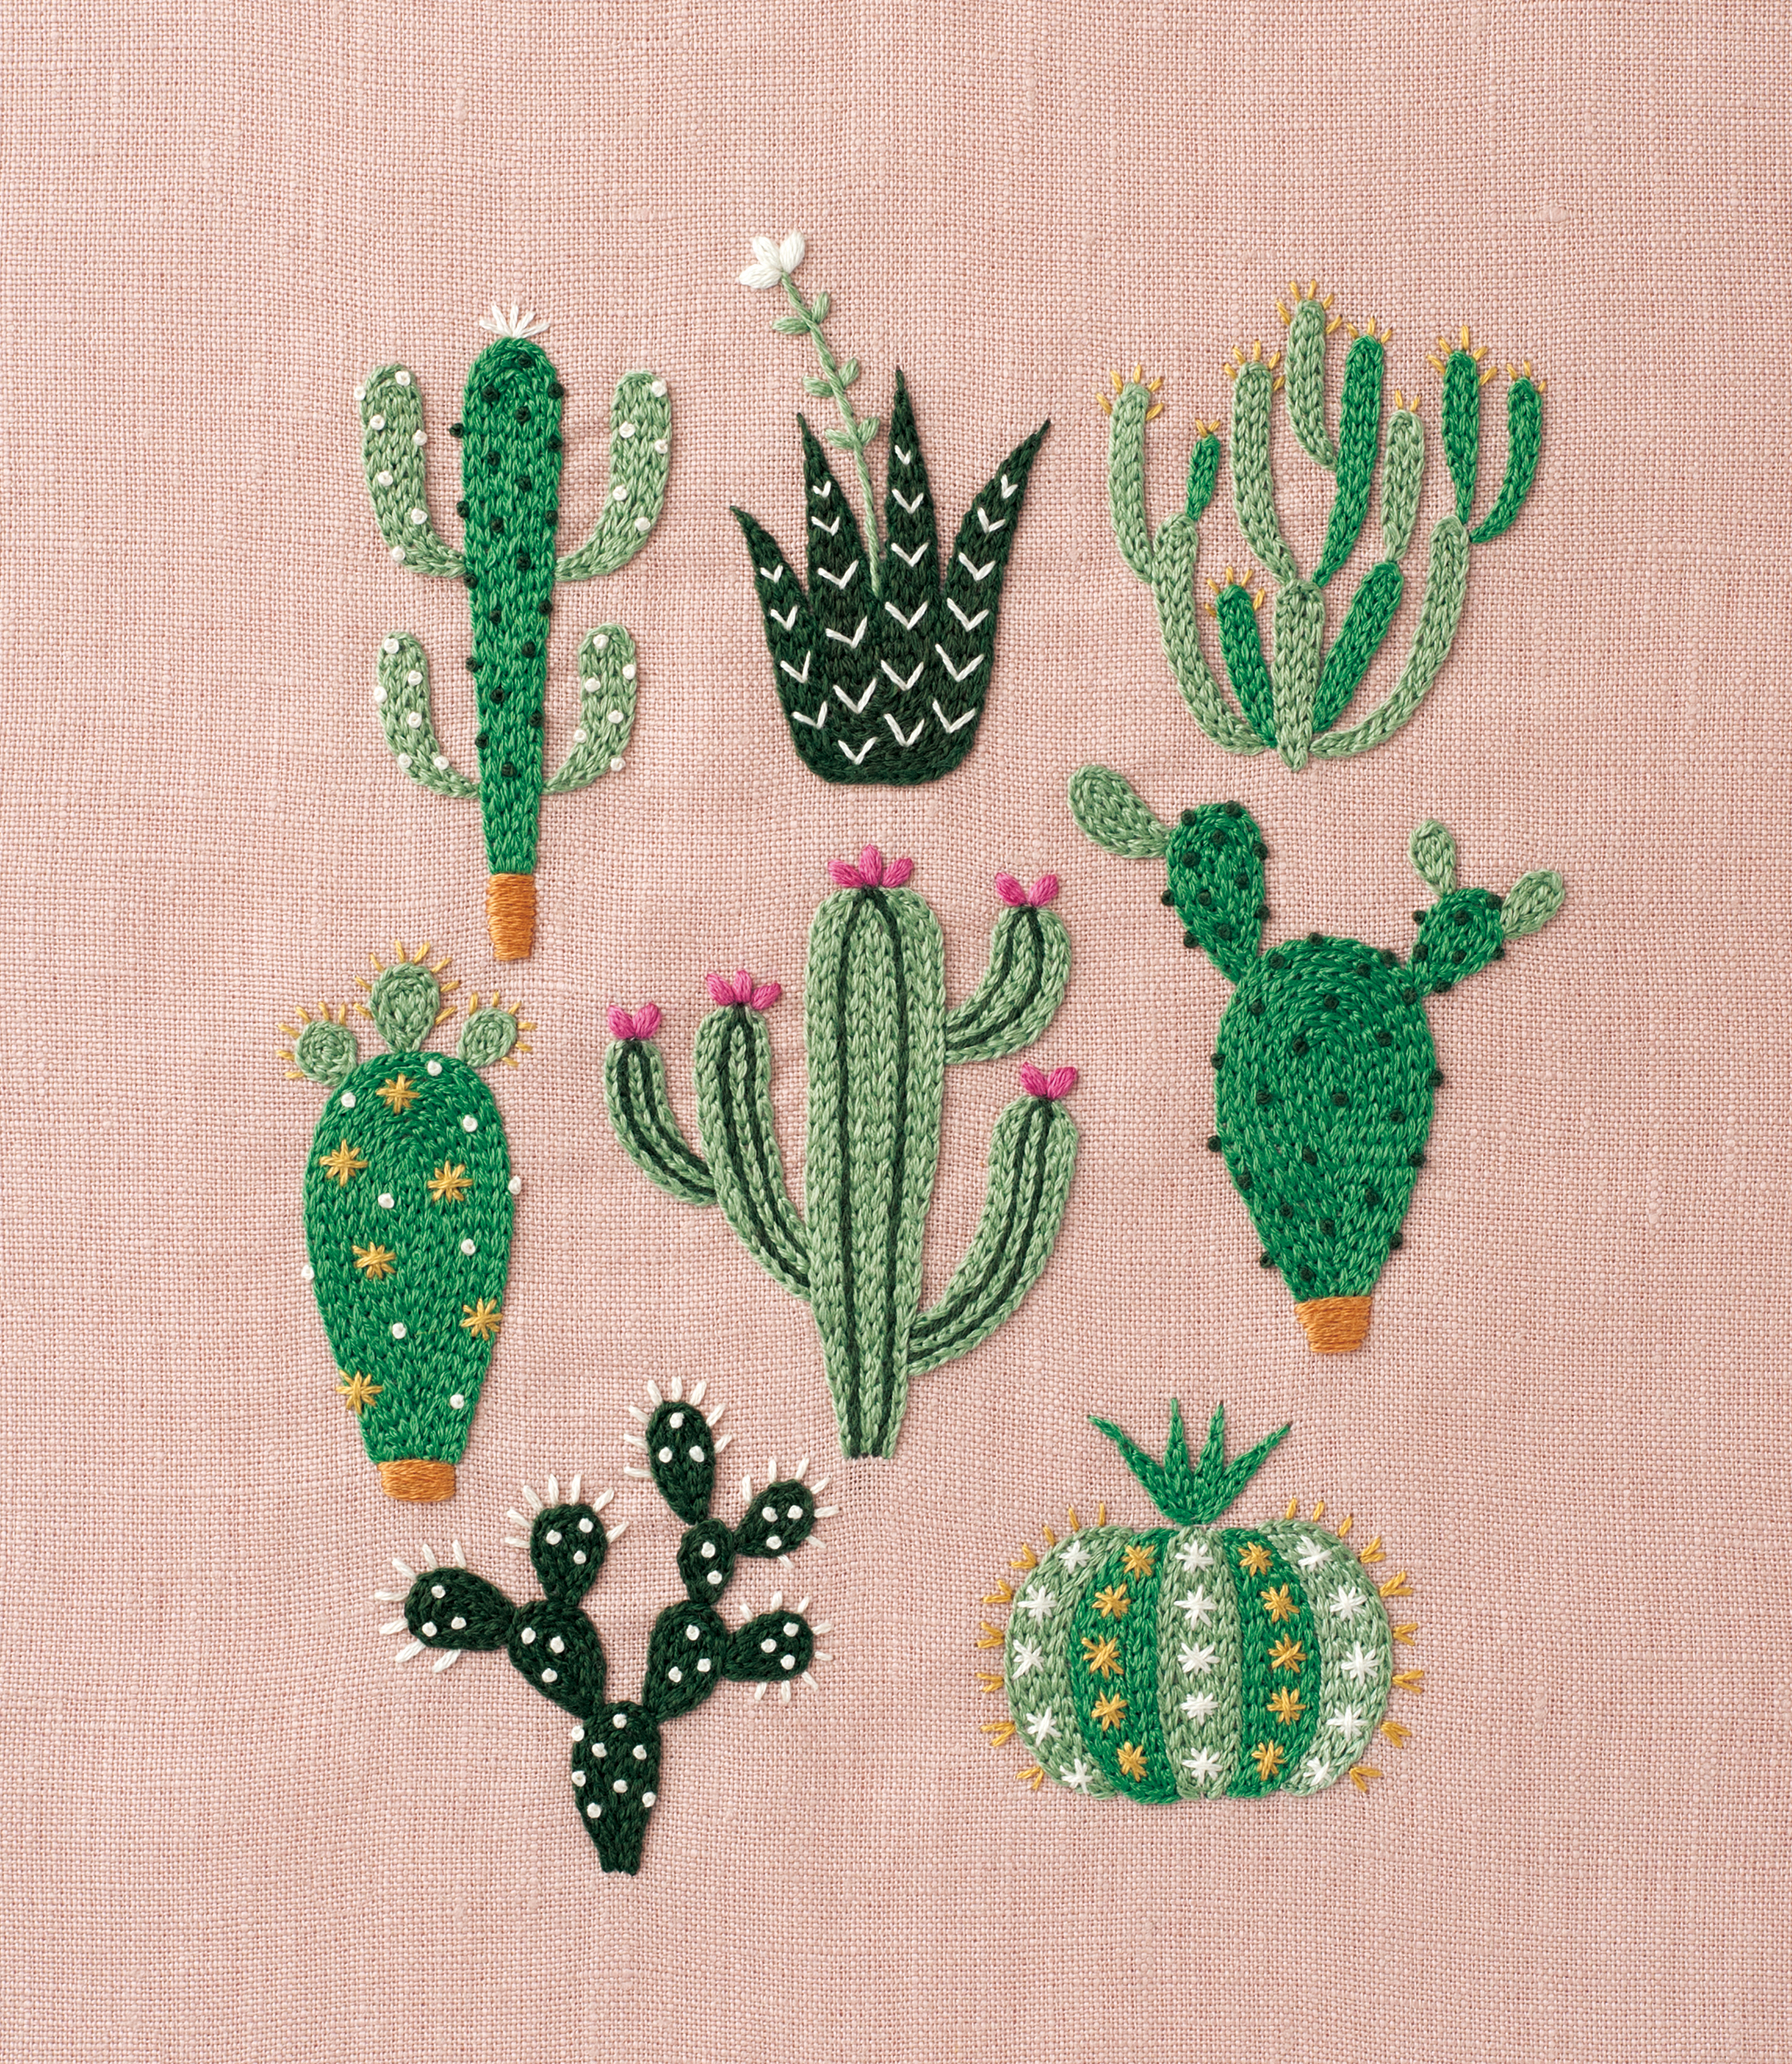 Japanese Embroidery Patterns Free Diy Floral Cactus Embroidery Projects From A Year Of Embroidery